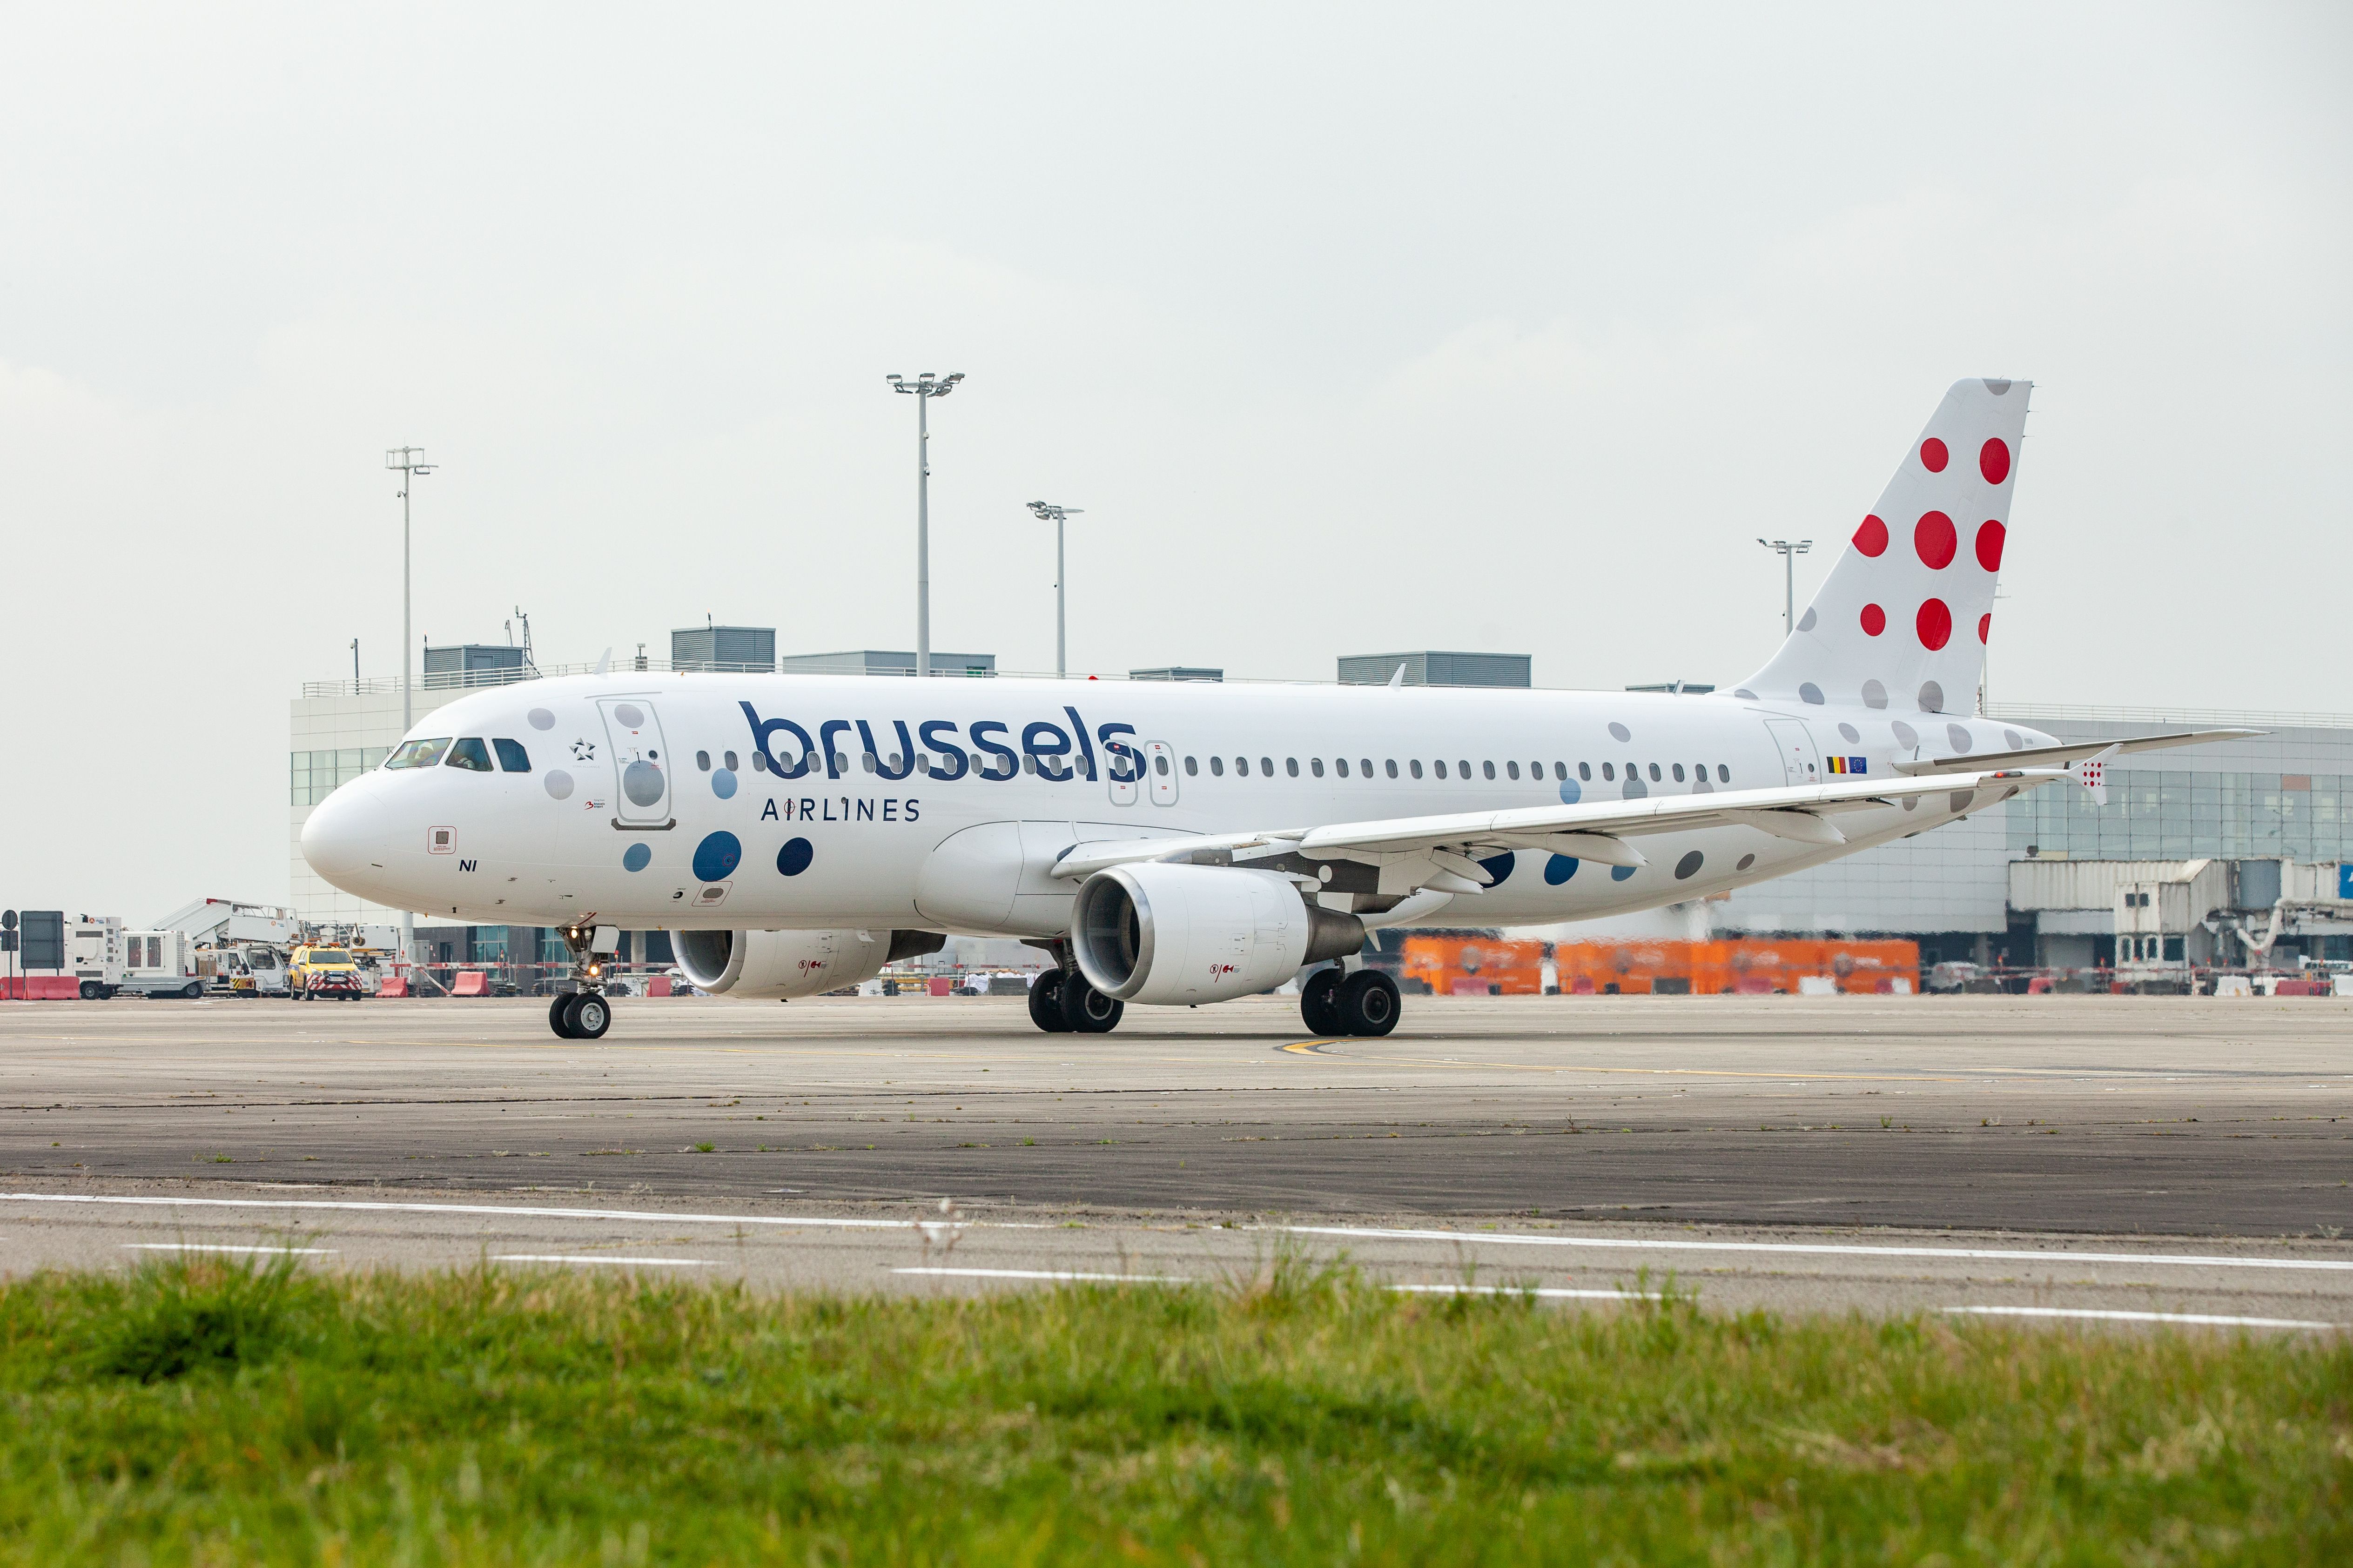 A Brussels Airlines Airbus A320 Taxiing on an airport apron.